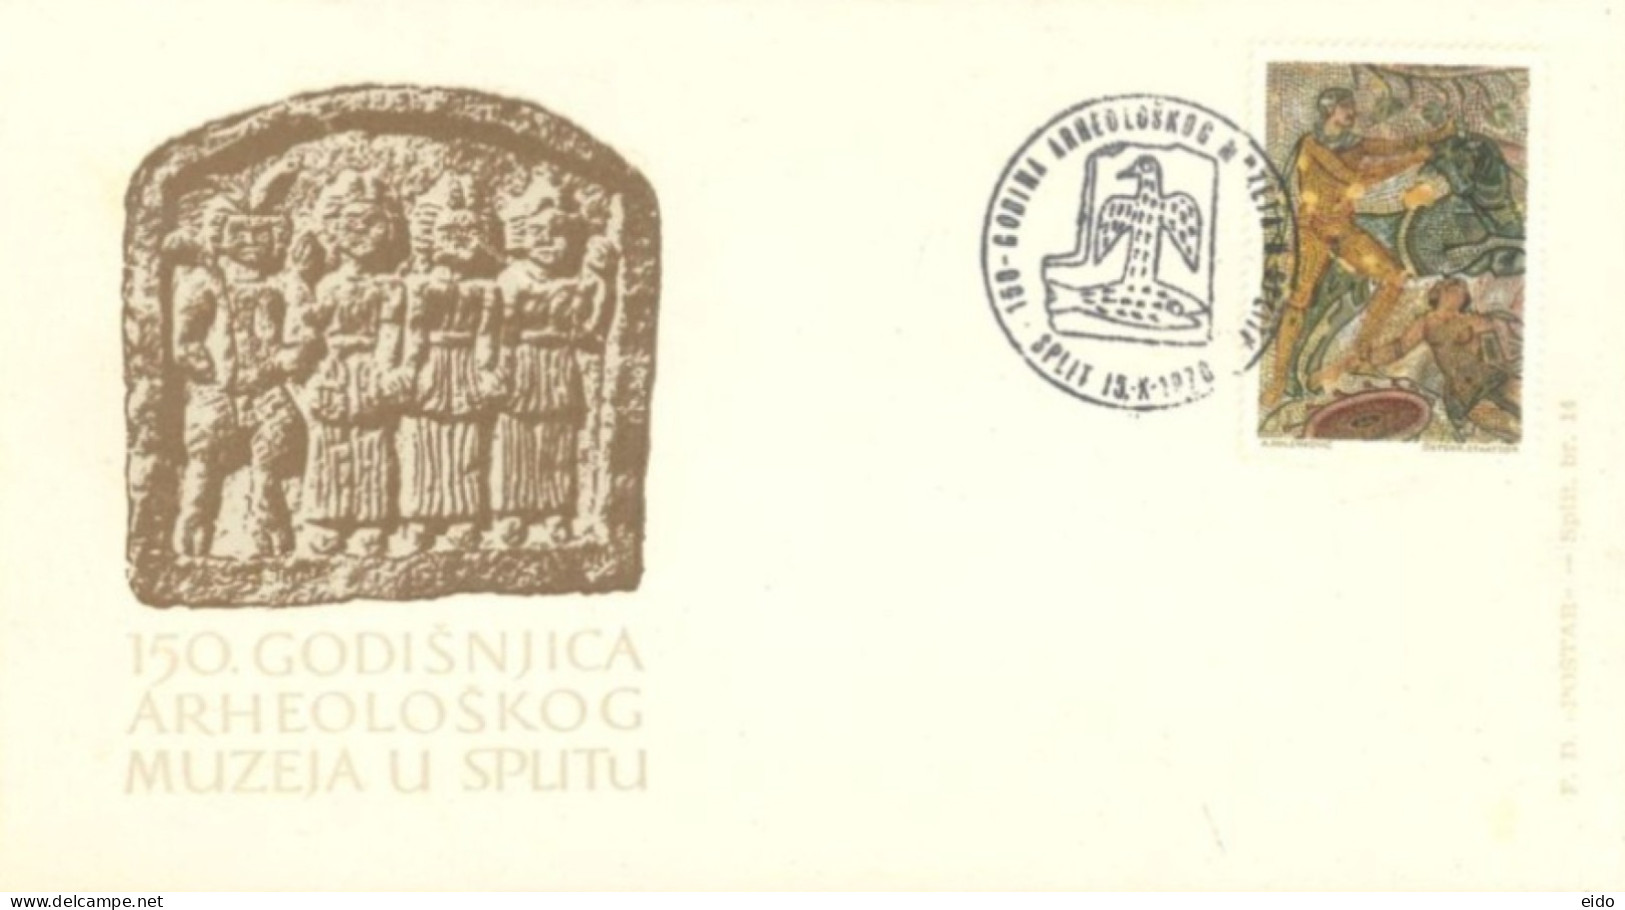 YUGOSLAVIA  - 1970, FDC STAMP OF150 GODINKA  ARCHAEOLOGICAL MUSEUM OF SPLIT WITH DESCRIPTION LEAFLET. - Covers & Documents